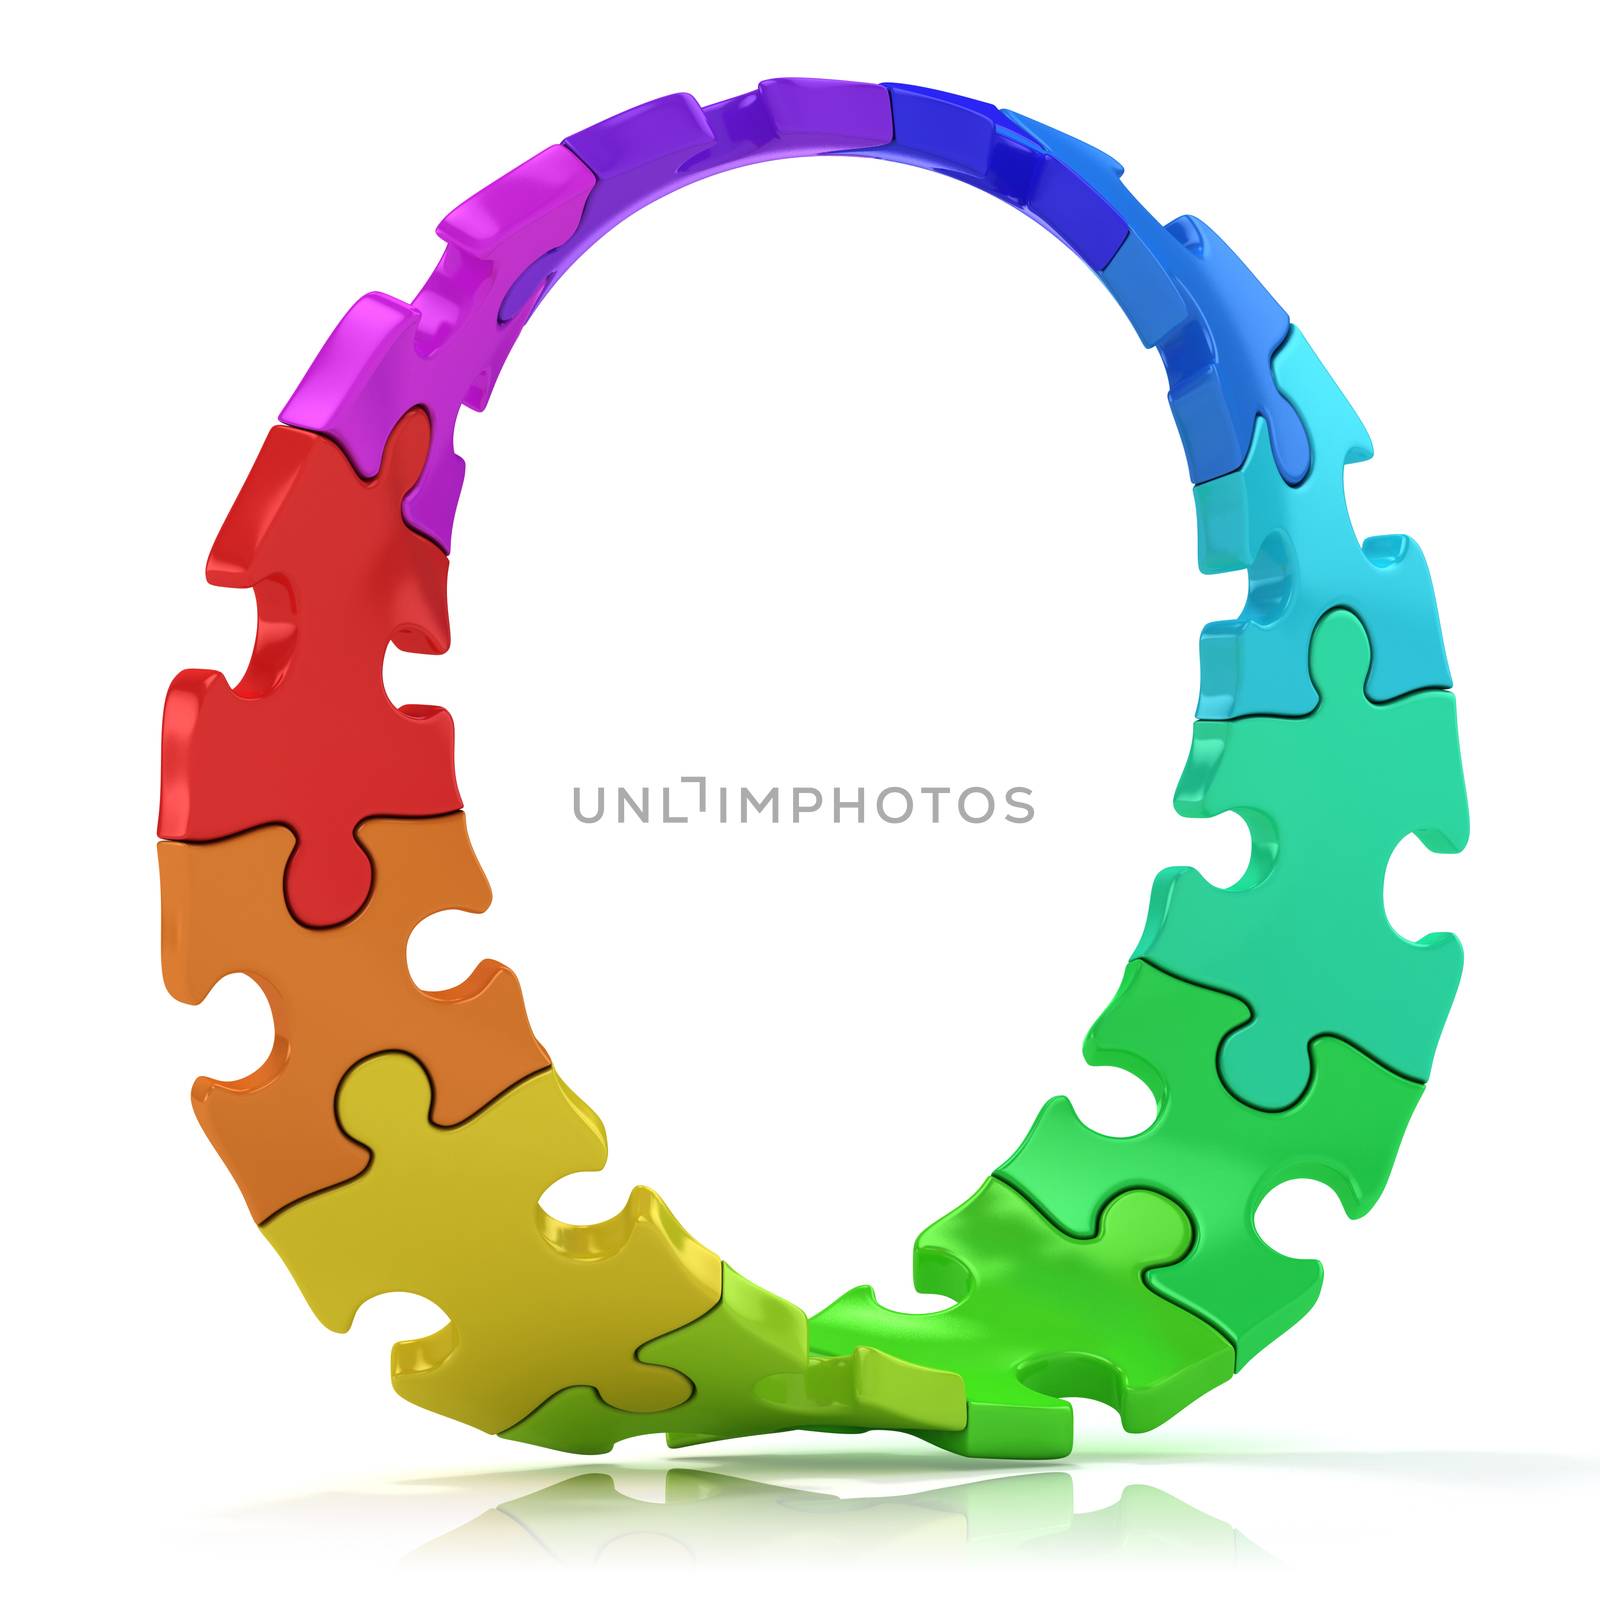 Twisted circle of colorful jigsaw puzzles by djmilic